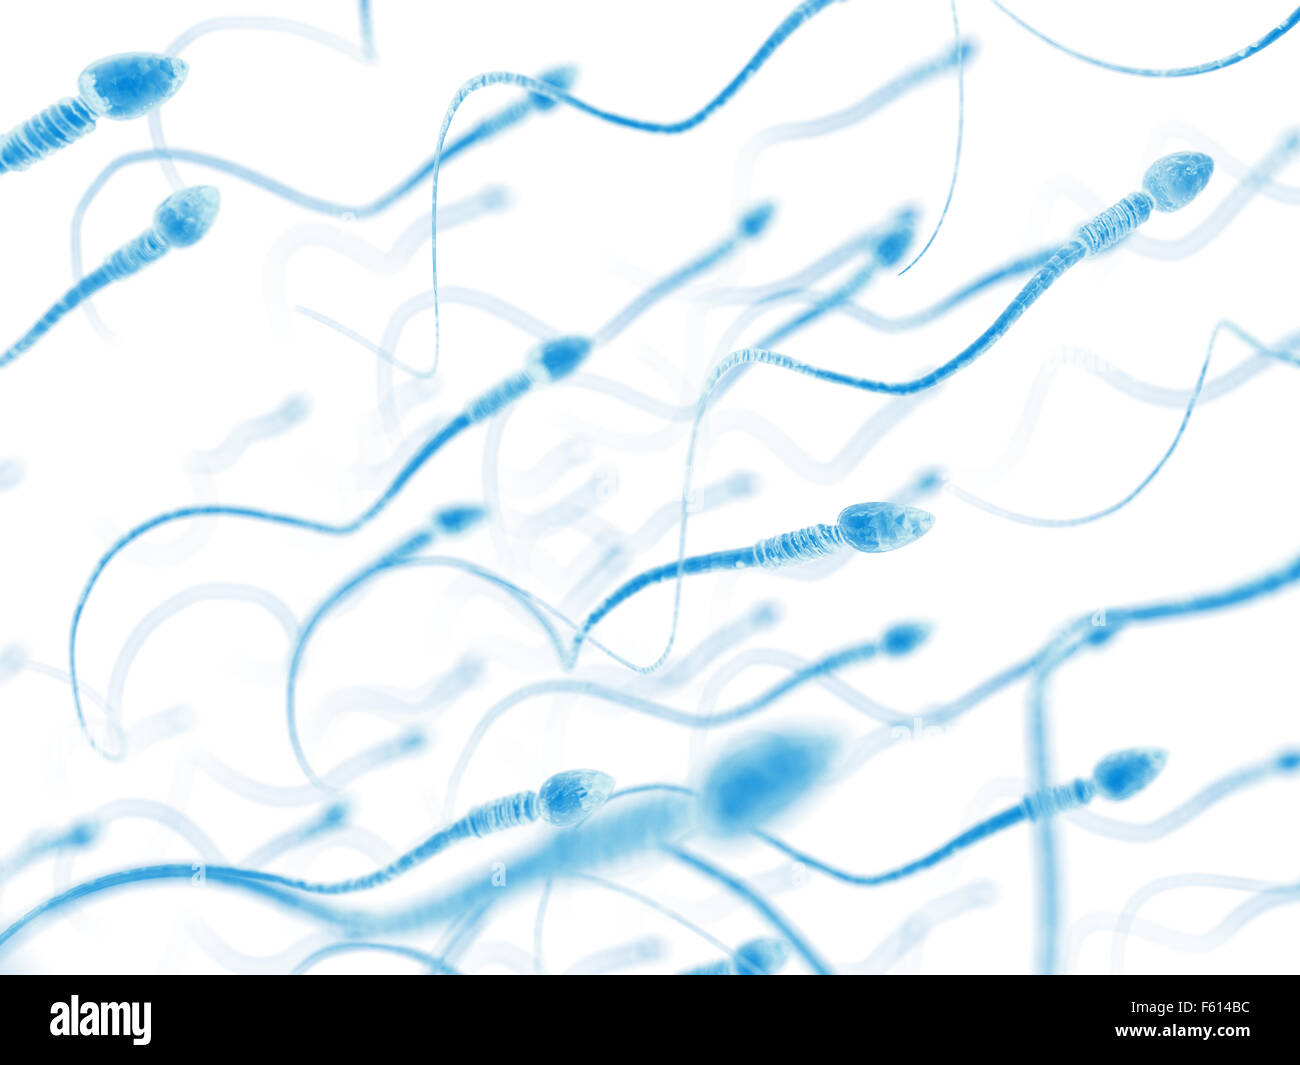 medically accurate illustration of human sperms Stock Photo